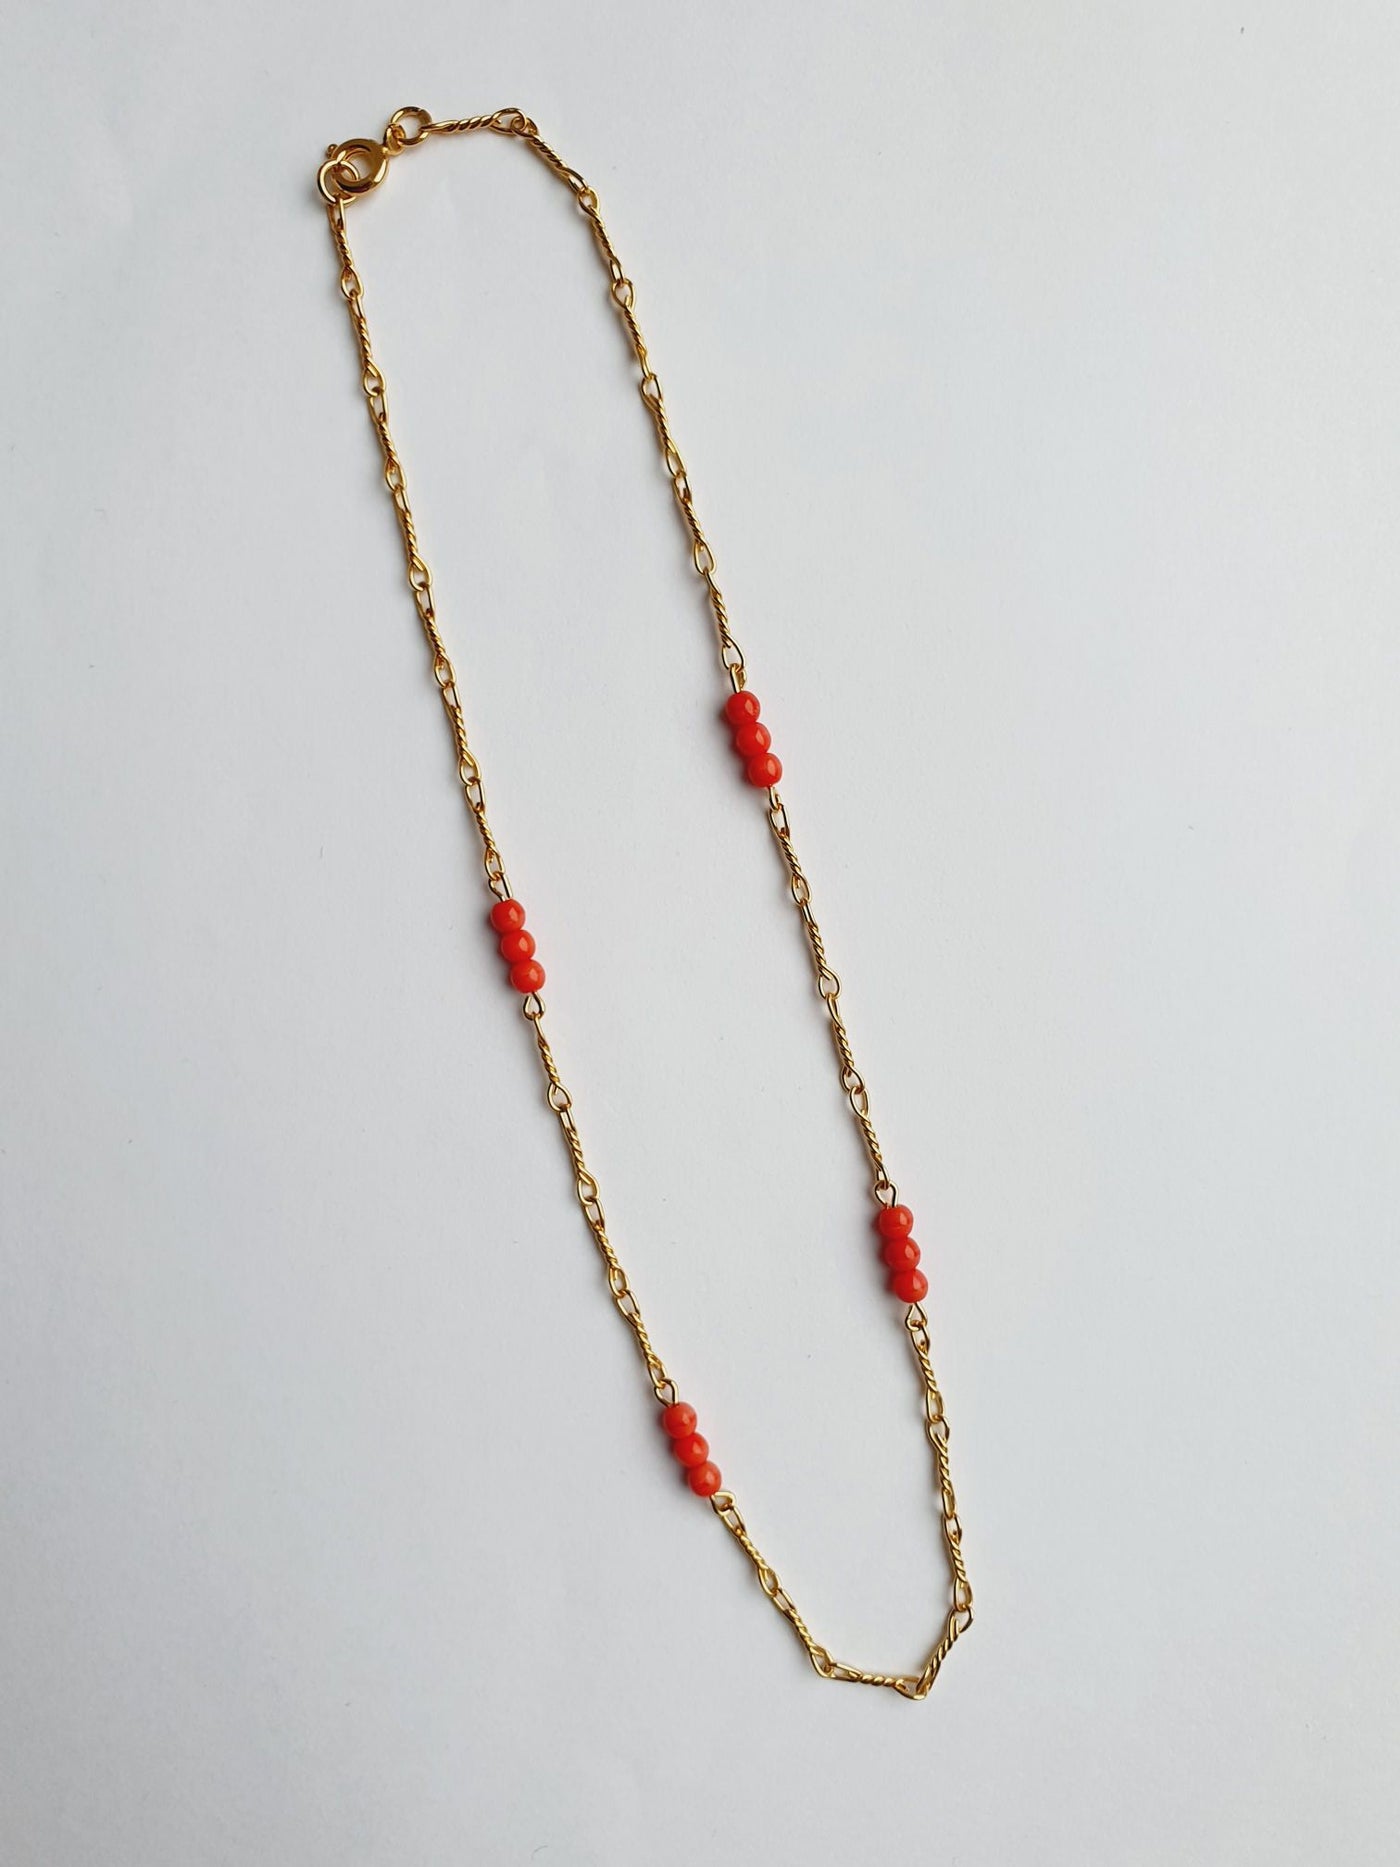 Vintage Gold Plated Chain Necklace with Pink Beads